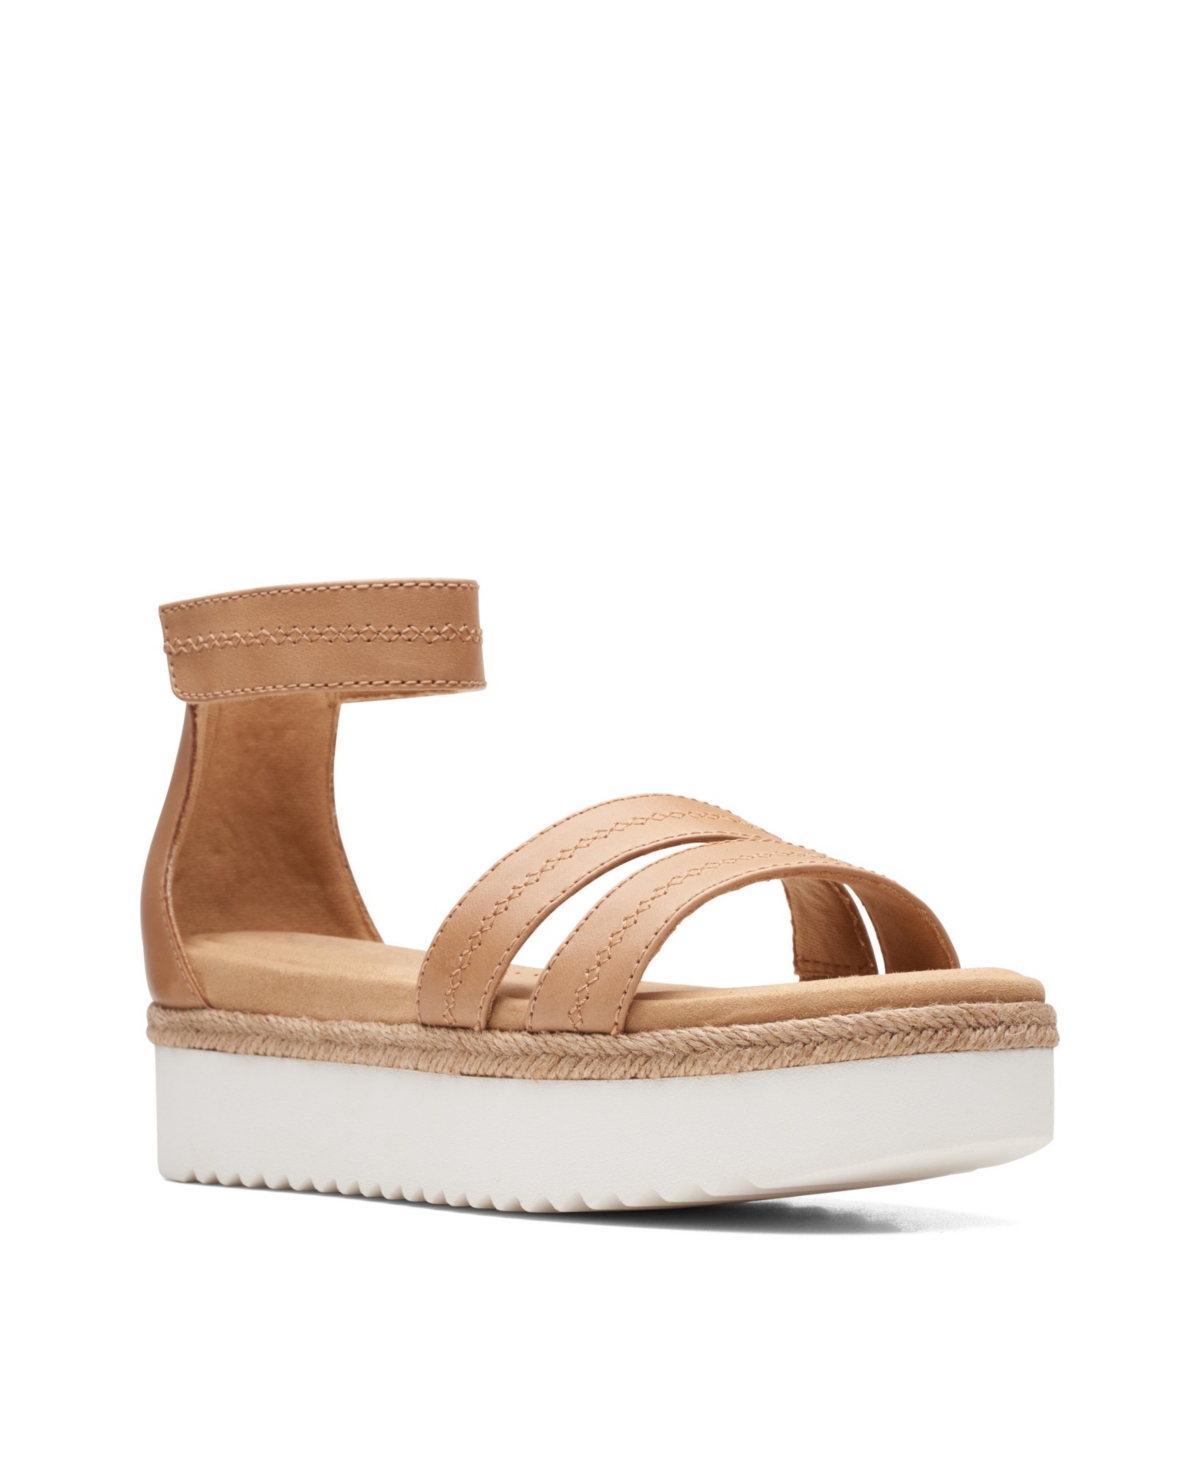 Clarks Women's Collection Lana Glide Wedge Sandals Women's Shoes In ...